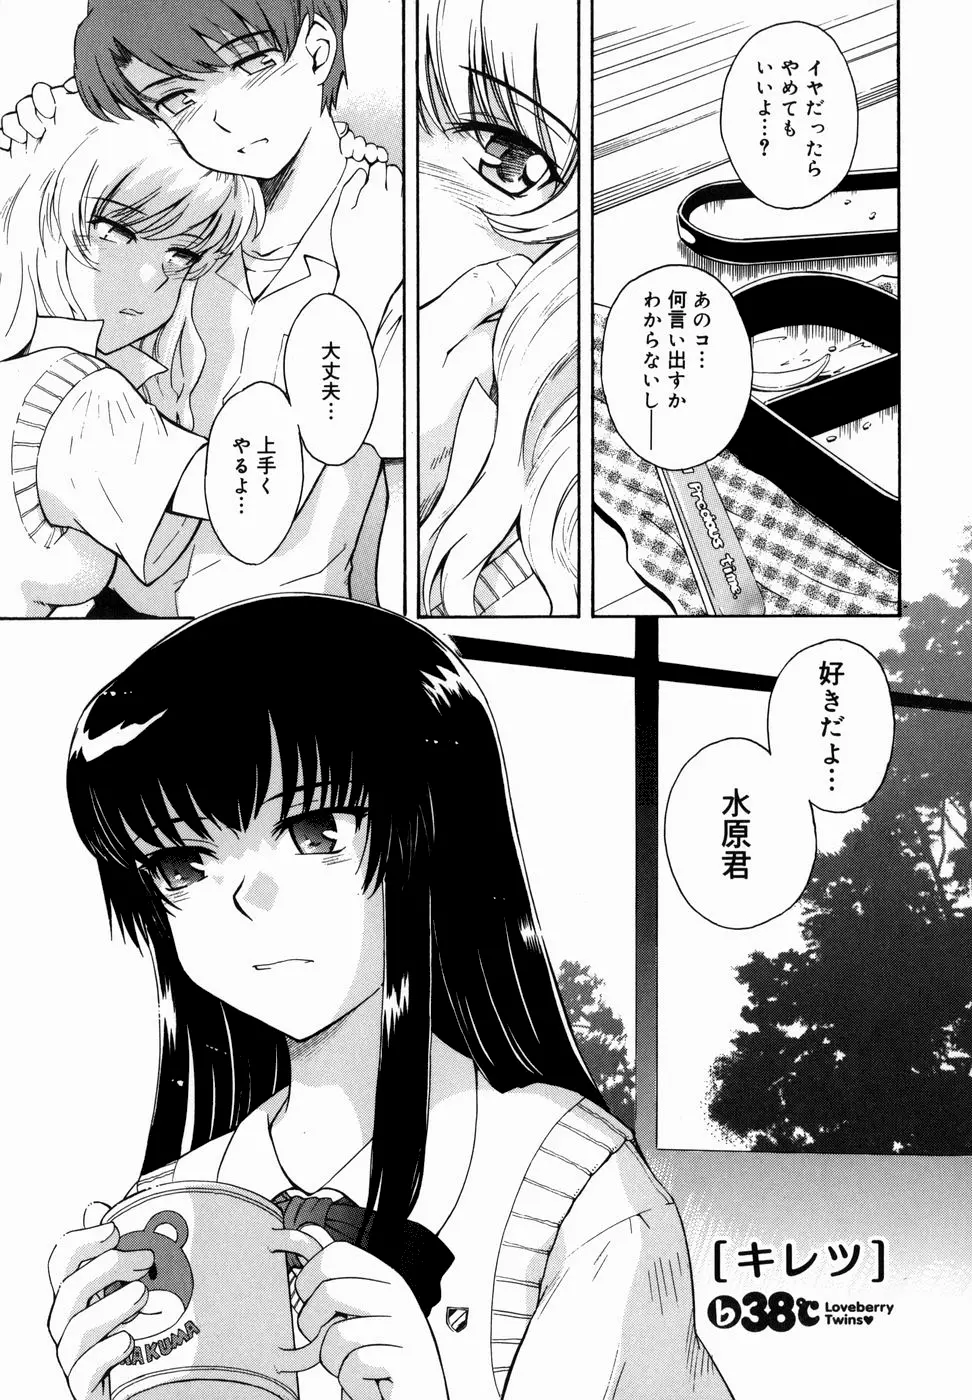 ♭38℃ Loveberry Twins Page.57